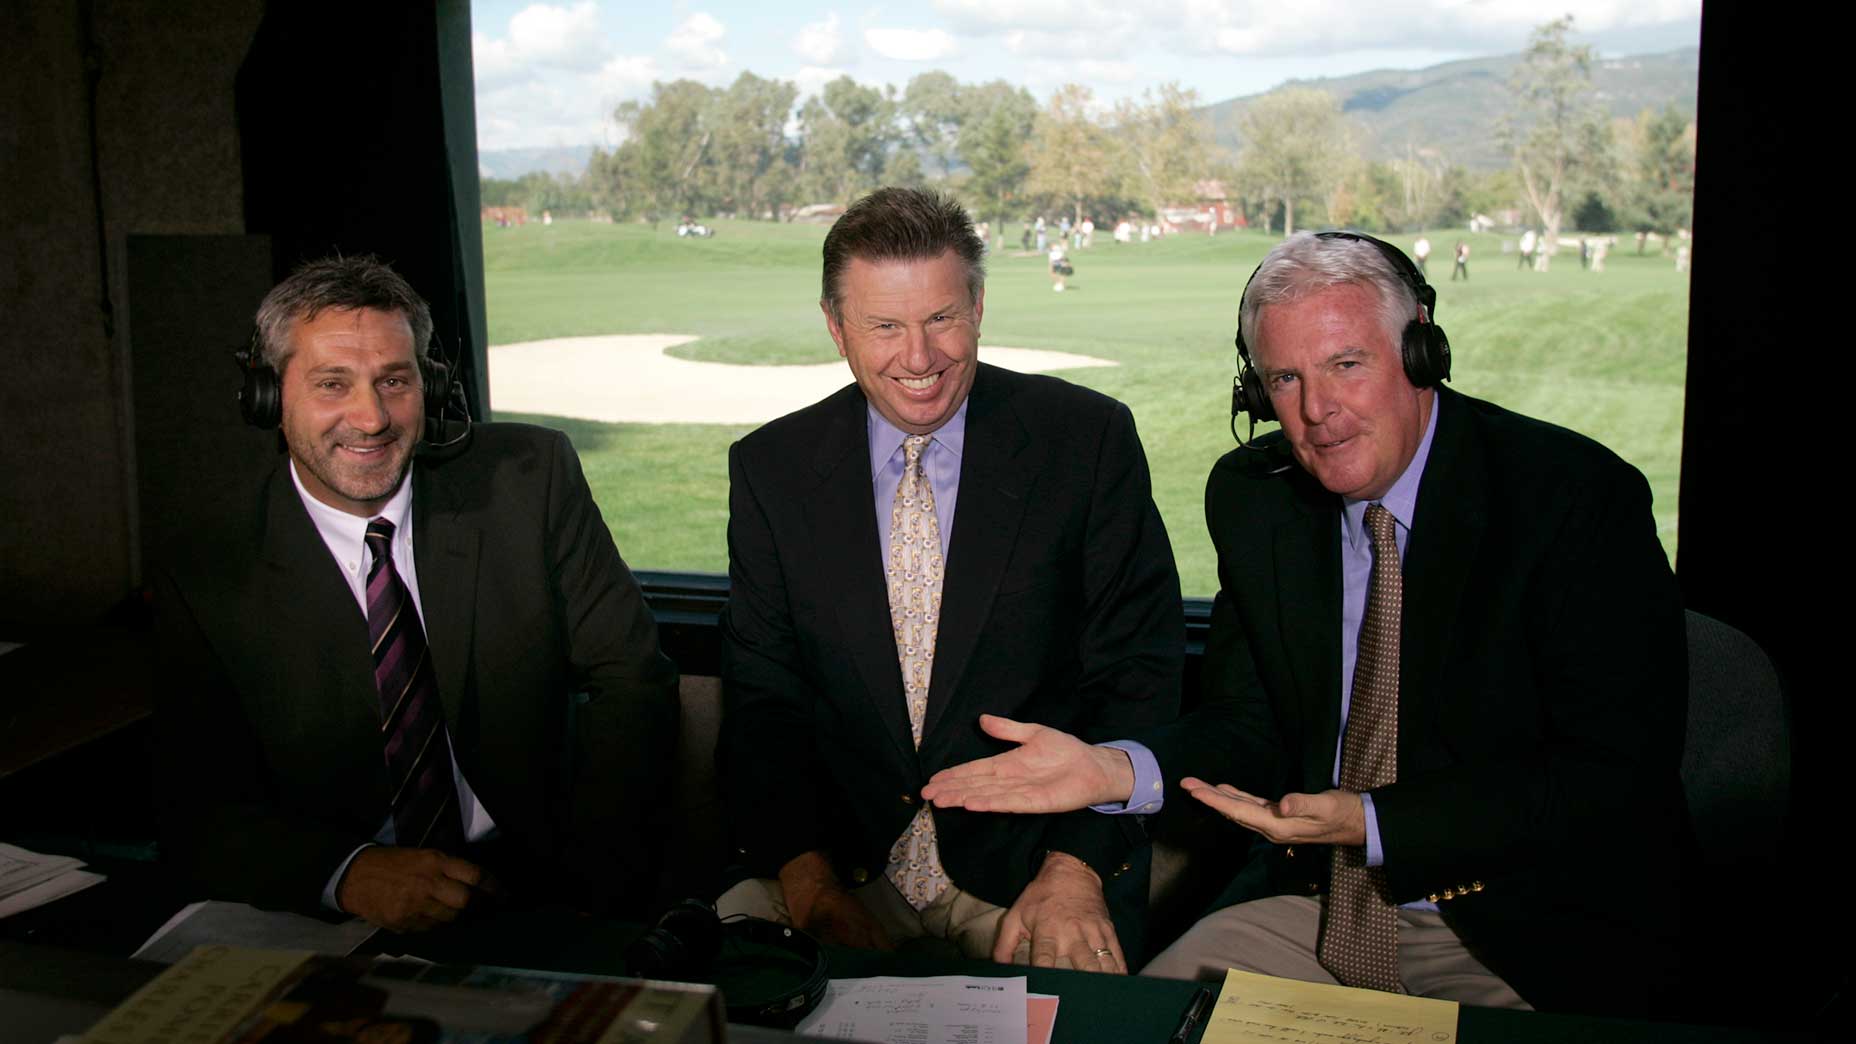 From left, Frank Nobilo, Peter Oosterhuis and Jim Kelly in the booth.